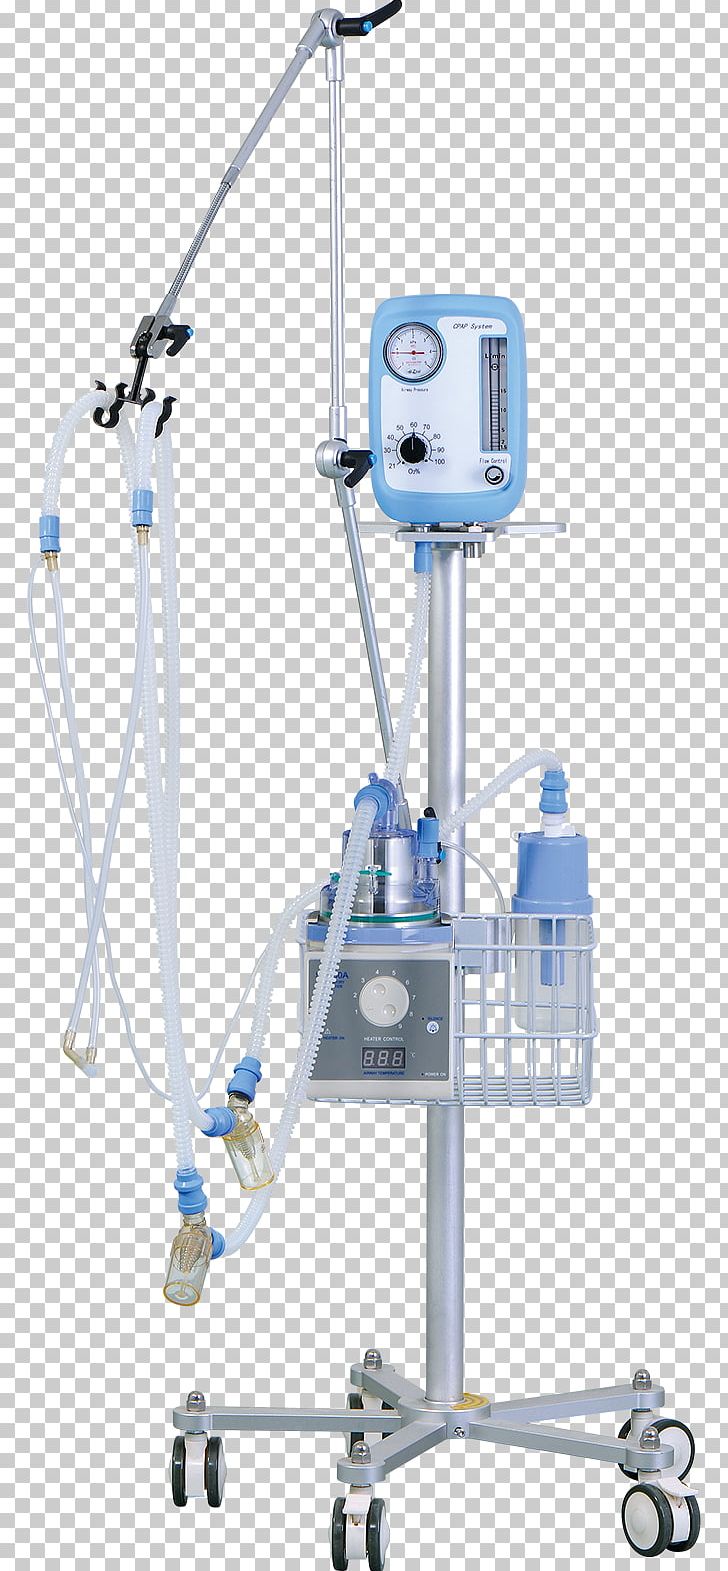 Medical Equipment Continuous Positive Airway Pressure Non-invasive Ventilation Medicine PNG, Clipart, Breathing, Cpap, Department, Medical, Medical Equipment Free PNG Download